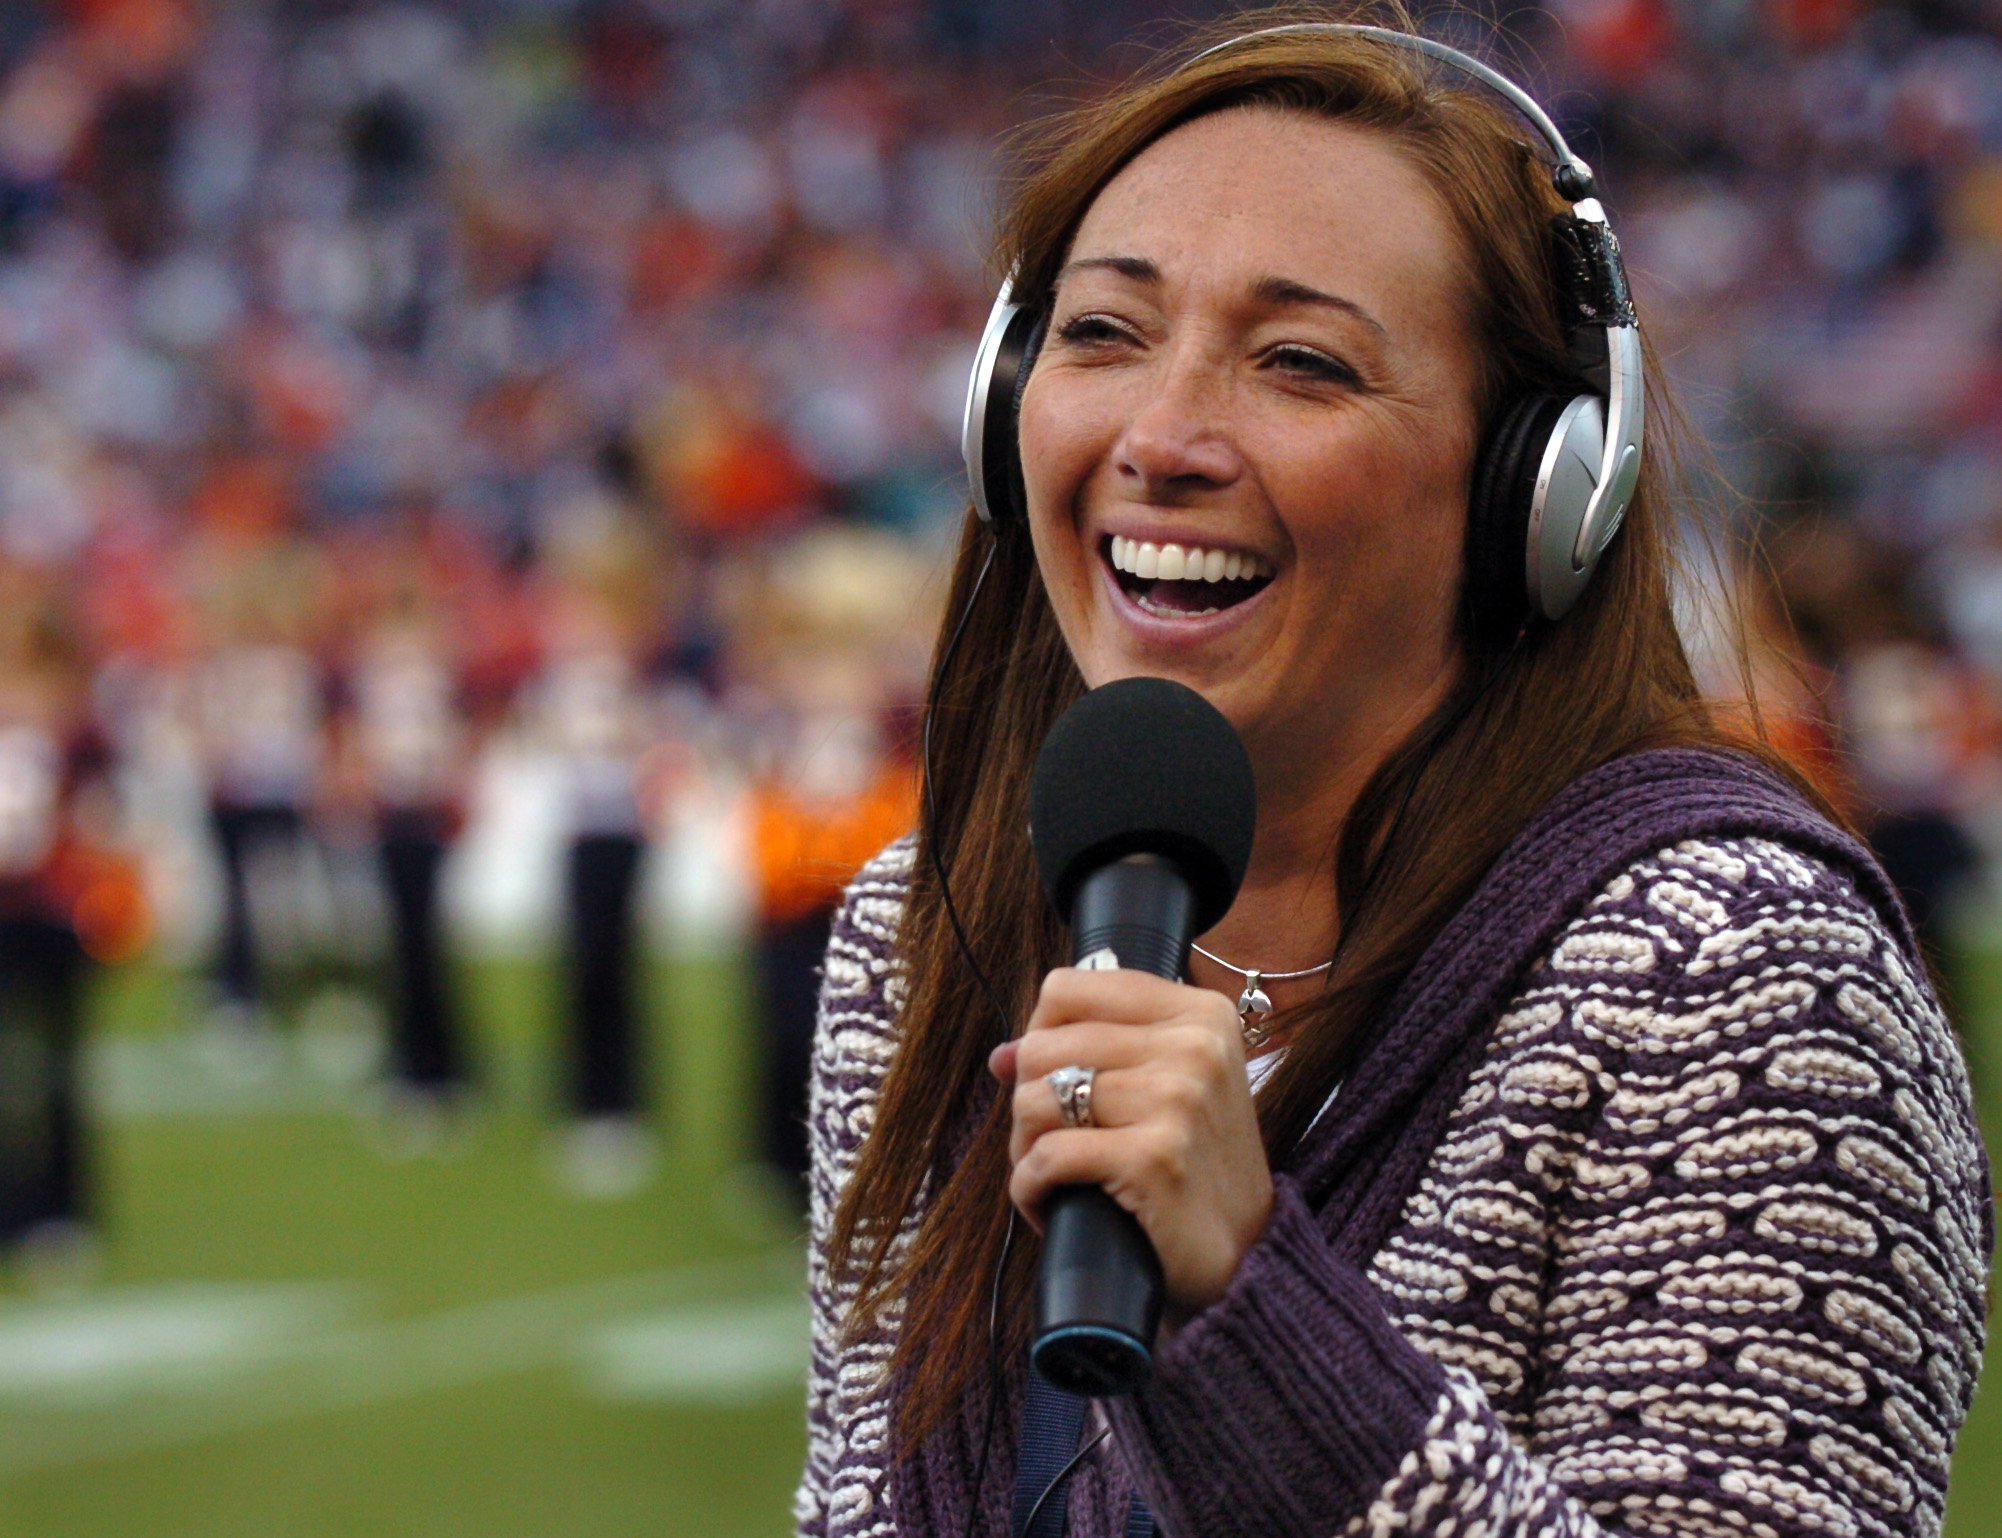 Denver Broncos side line reporter for 850 KOA Amy Van Dyken. Reporting on the Broncos vs the San Diego Chargers on Sunday, October 7th, 2007 at Invesco Field. Andy Cross / The Denver Post